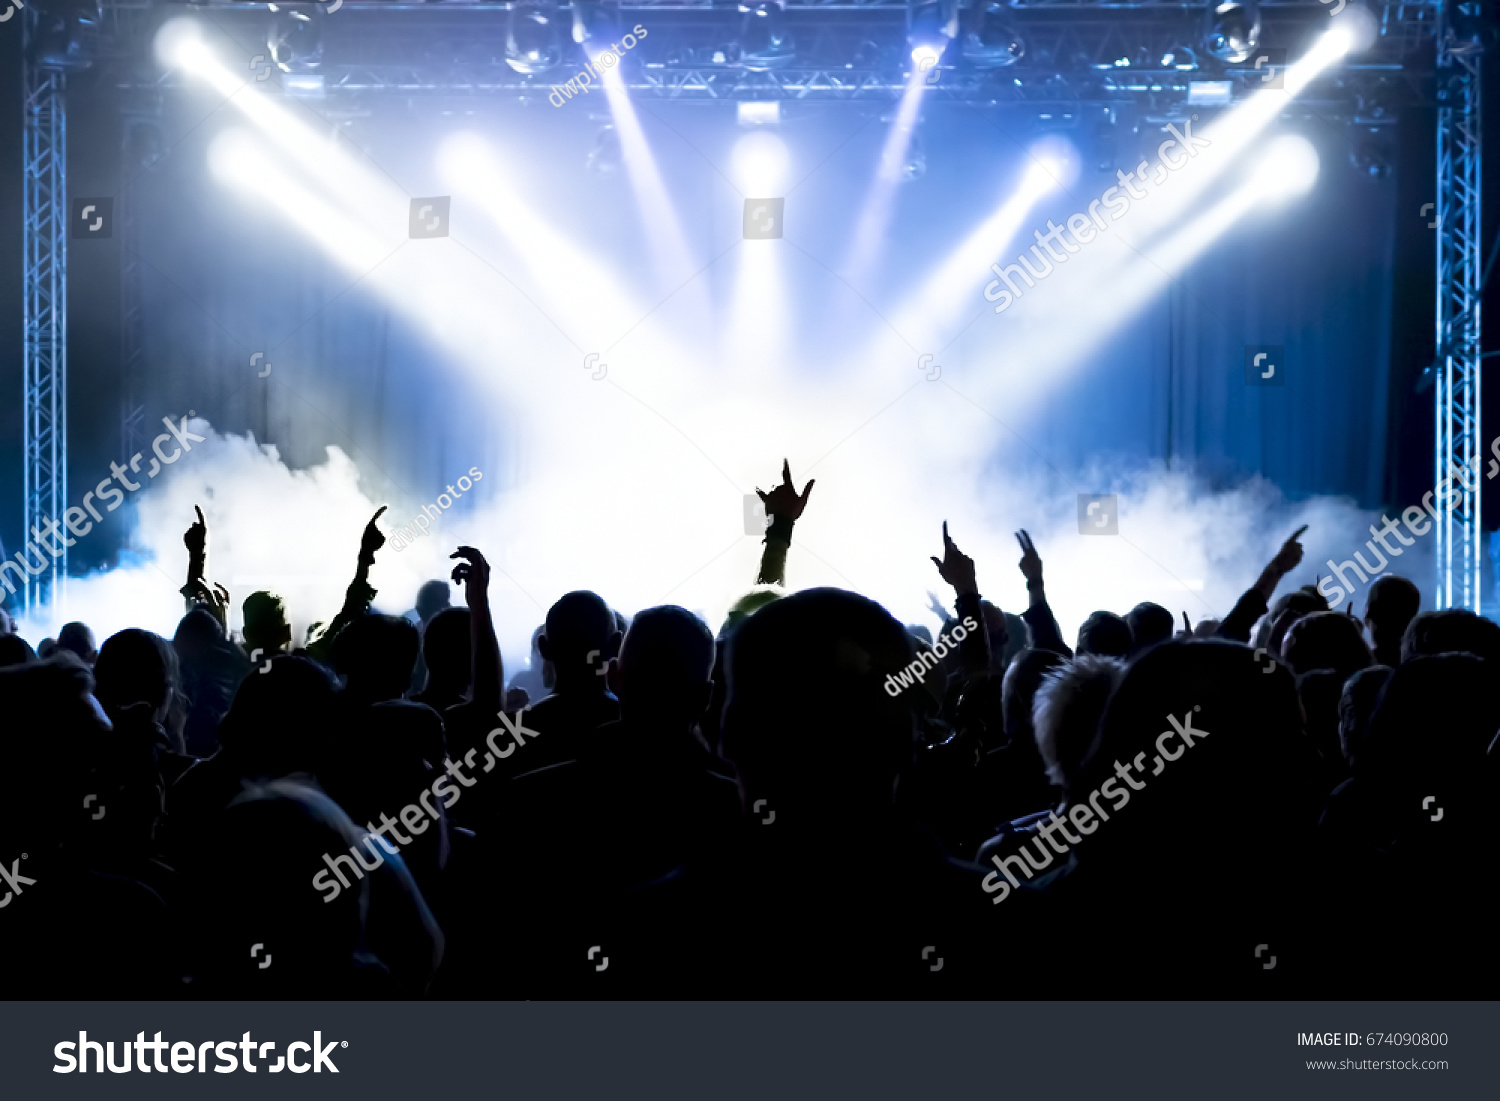 cheering crowd at rock concert in front of bright lights #674090800